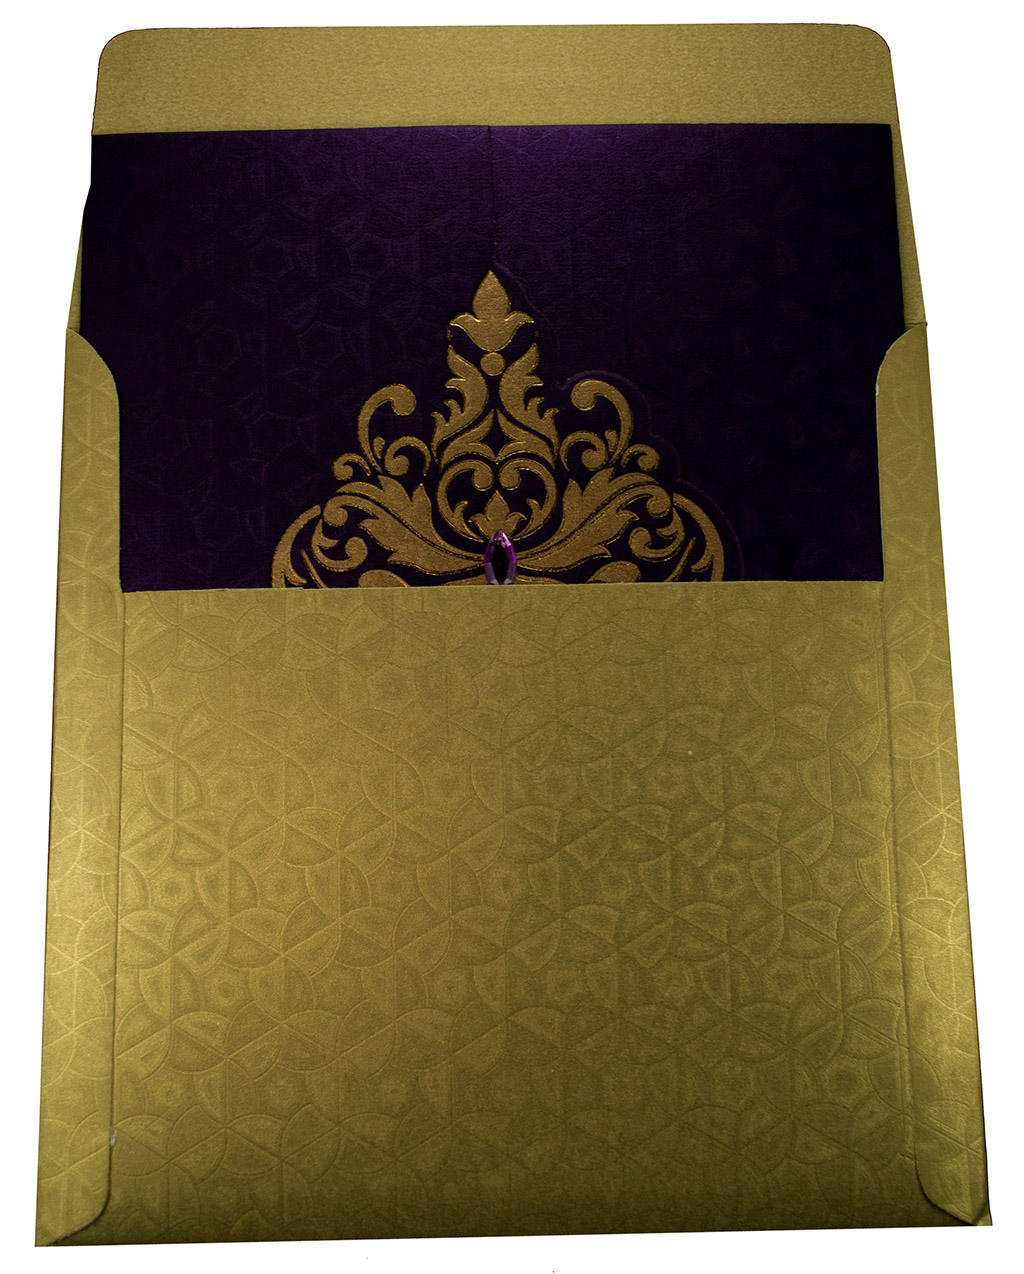 Elegant Wedding Invite in Rich Purple with Golden Patterns - Click Image to Close